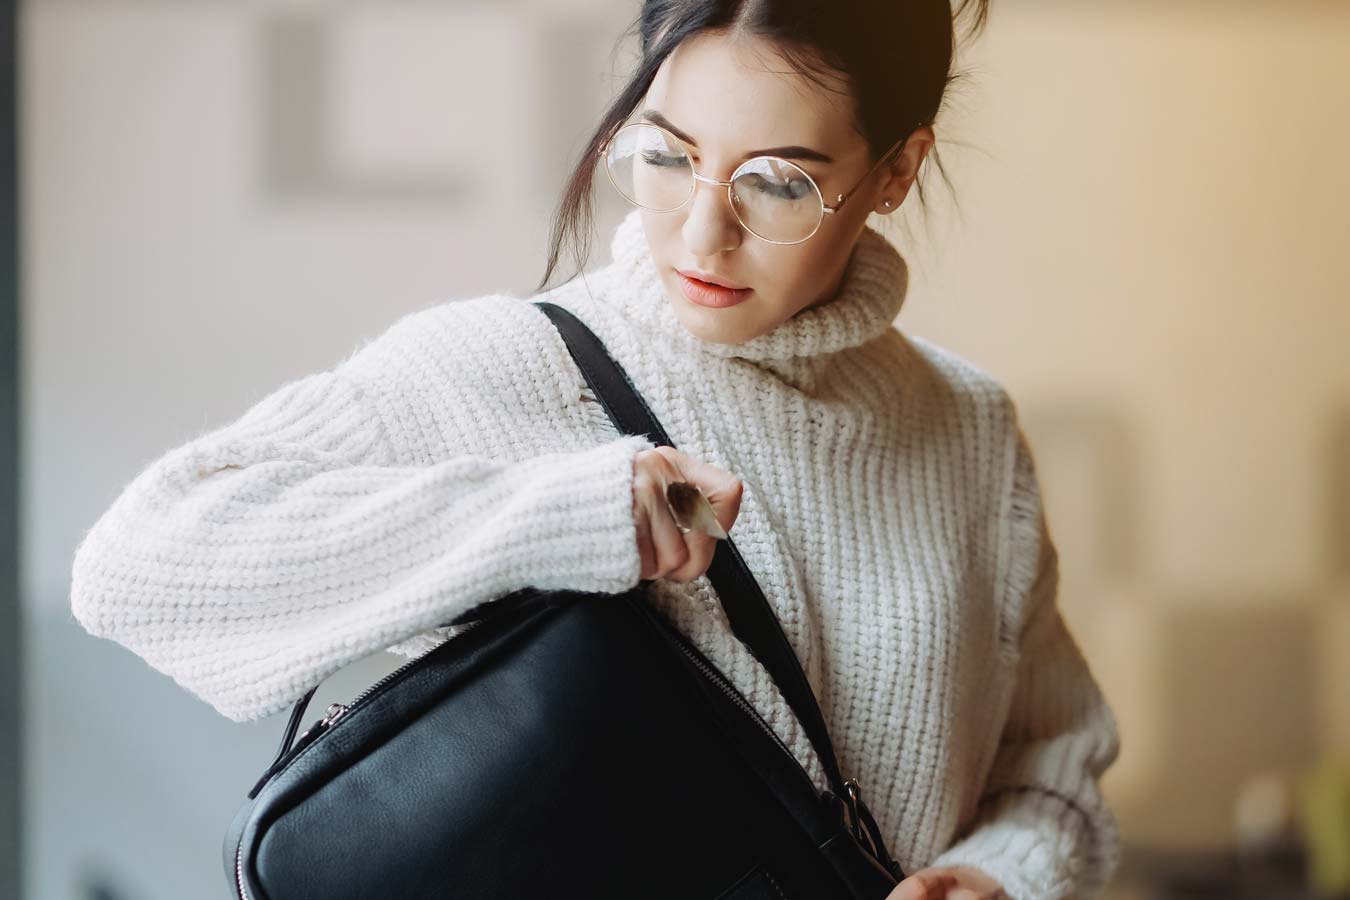 30 Vegan Backpacks That Are Chic & Practical for Everyday or Work